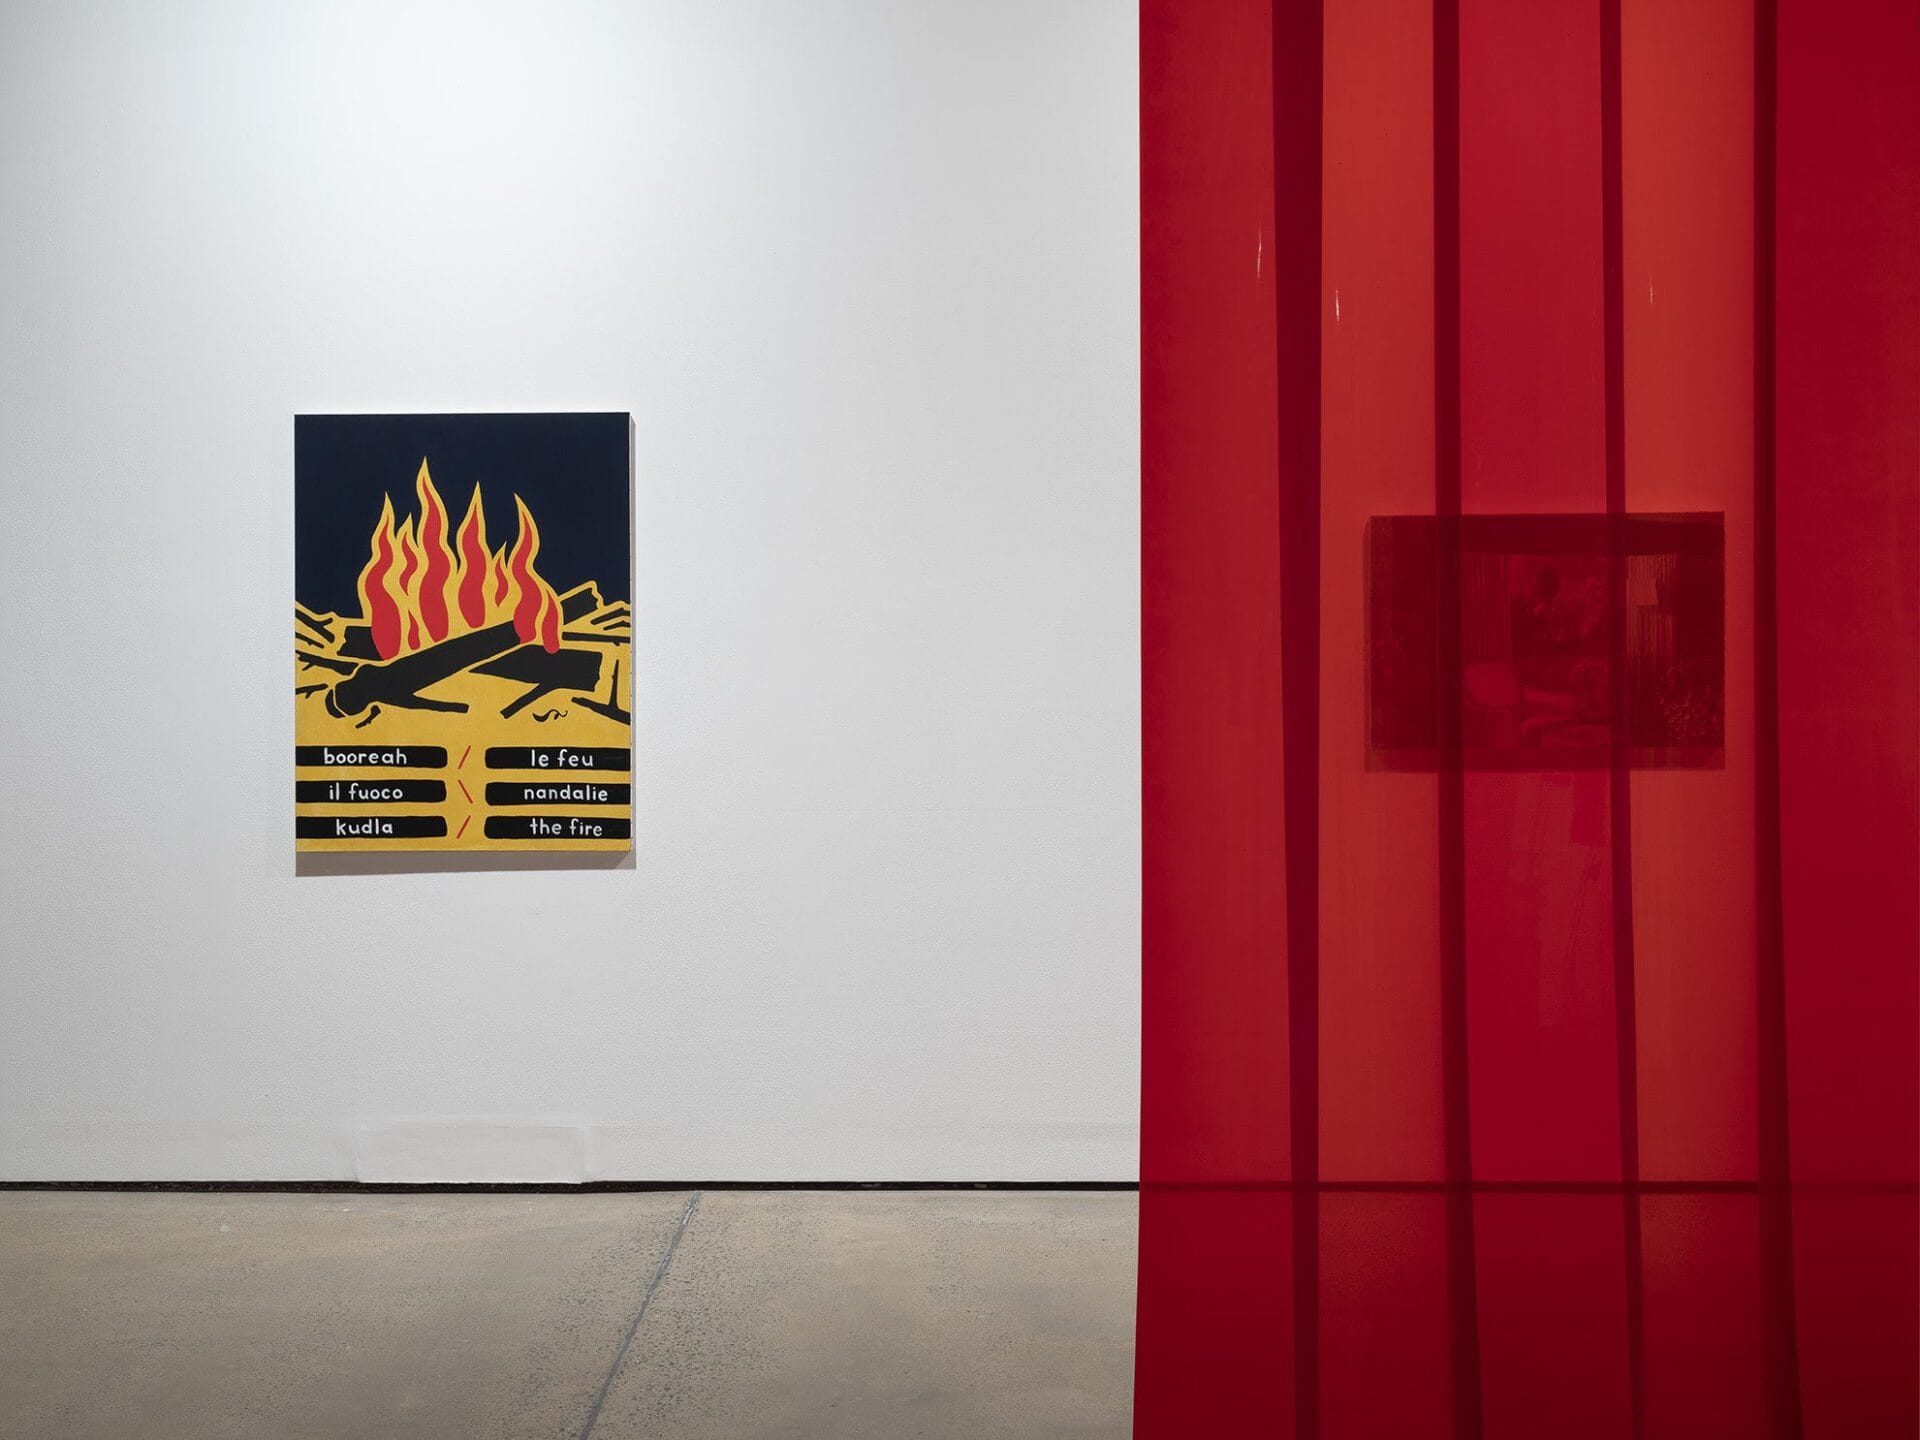 Installation view of 'On Fire: Climate and Crisis’, 2021, featuring work by Gordon Bennett, at the Institute of Modern Art, Brisbane. Courtesy the Estate of Gordon Bennett, Brisbane. Photo: Carl Warner.